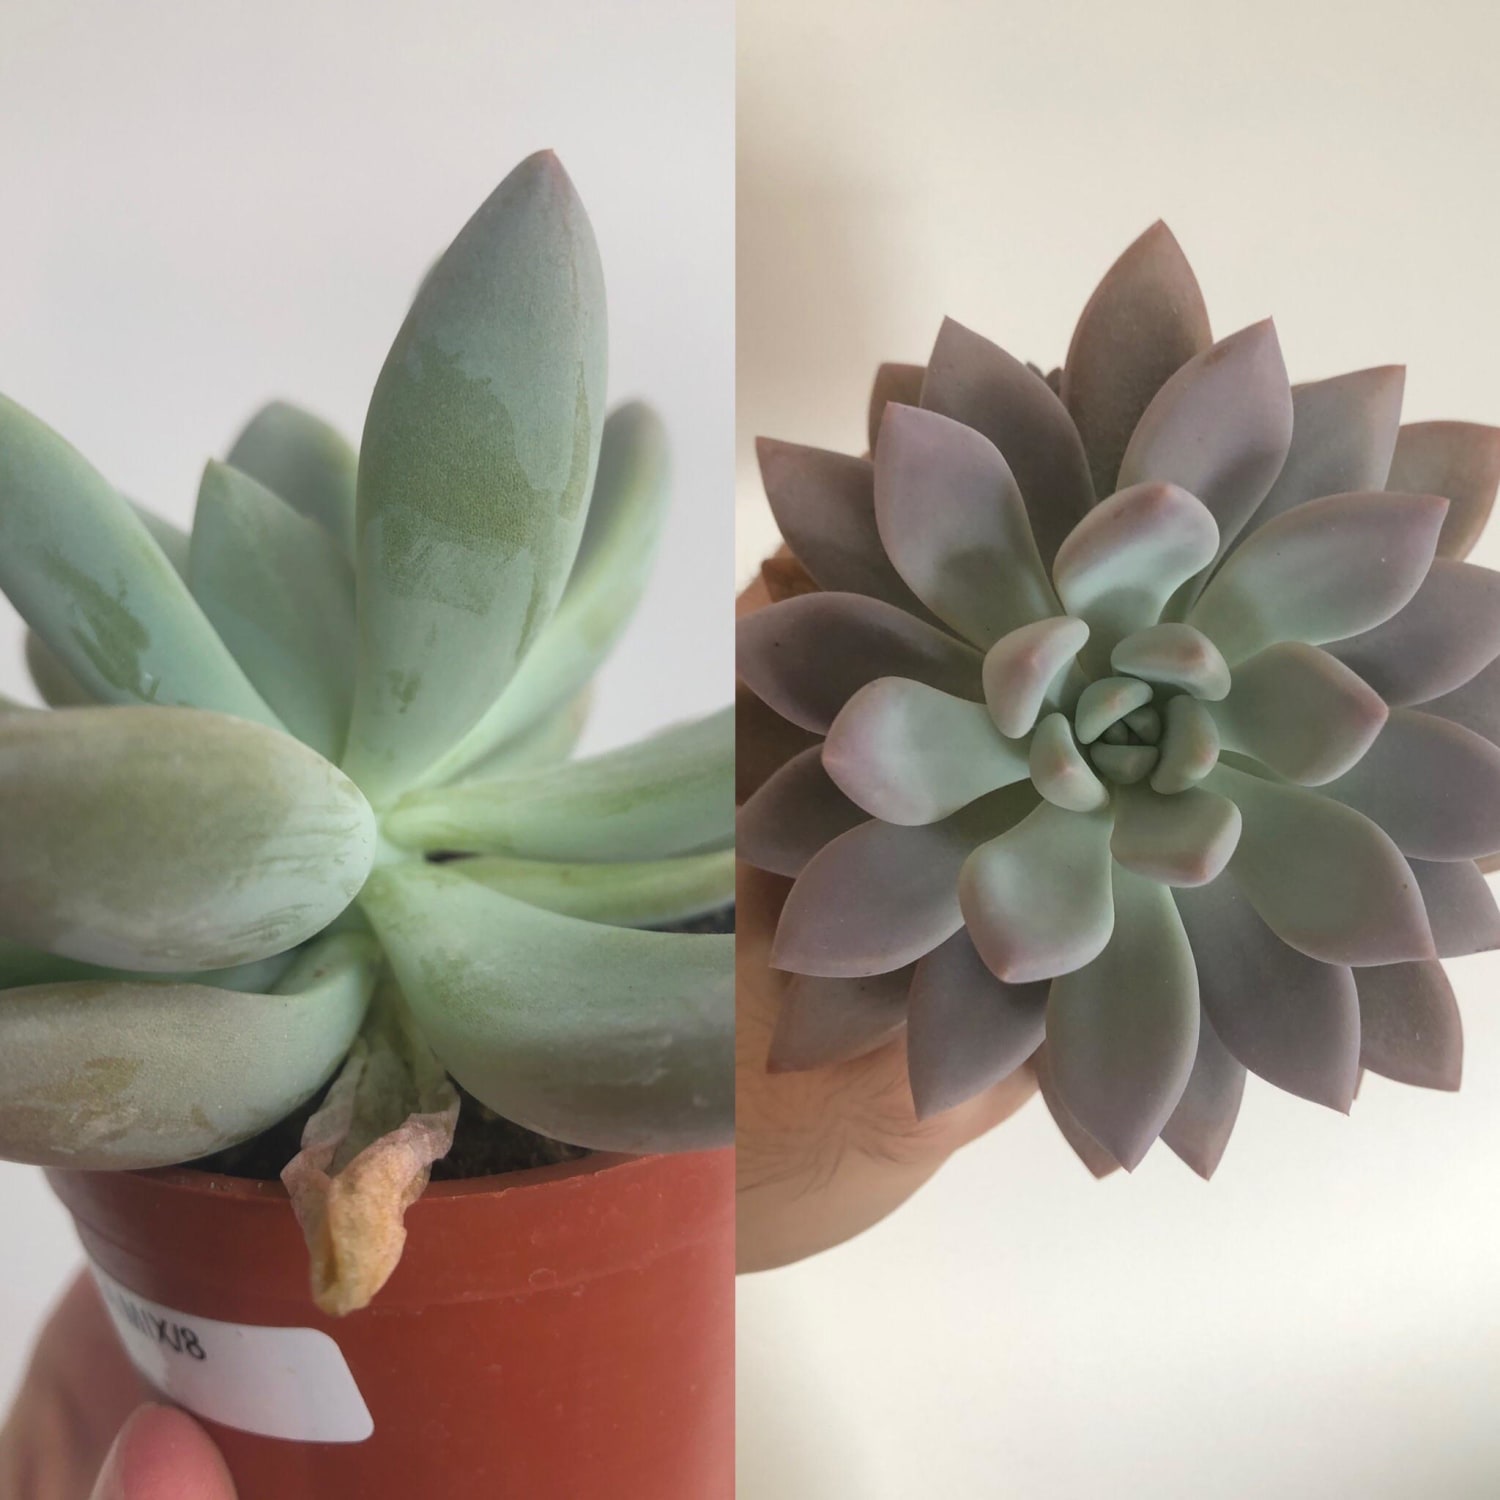 Before and after increasing light exposure on my Graptoveria Opalina